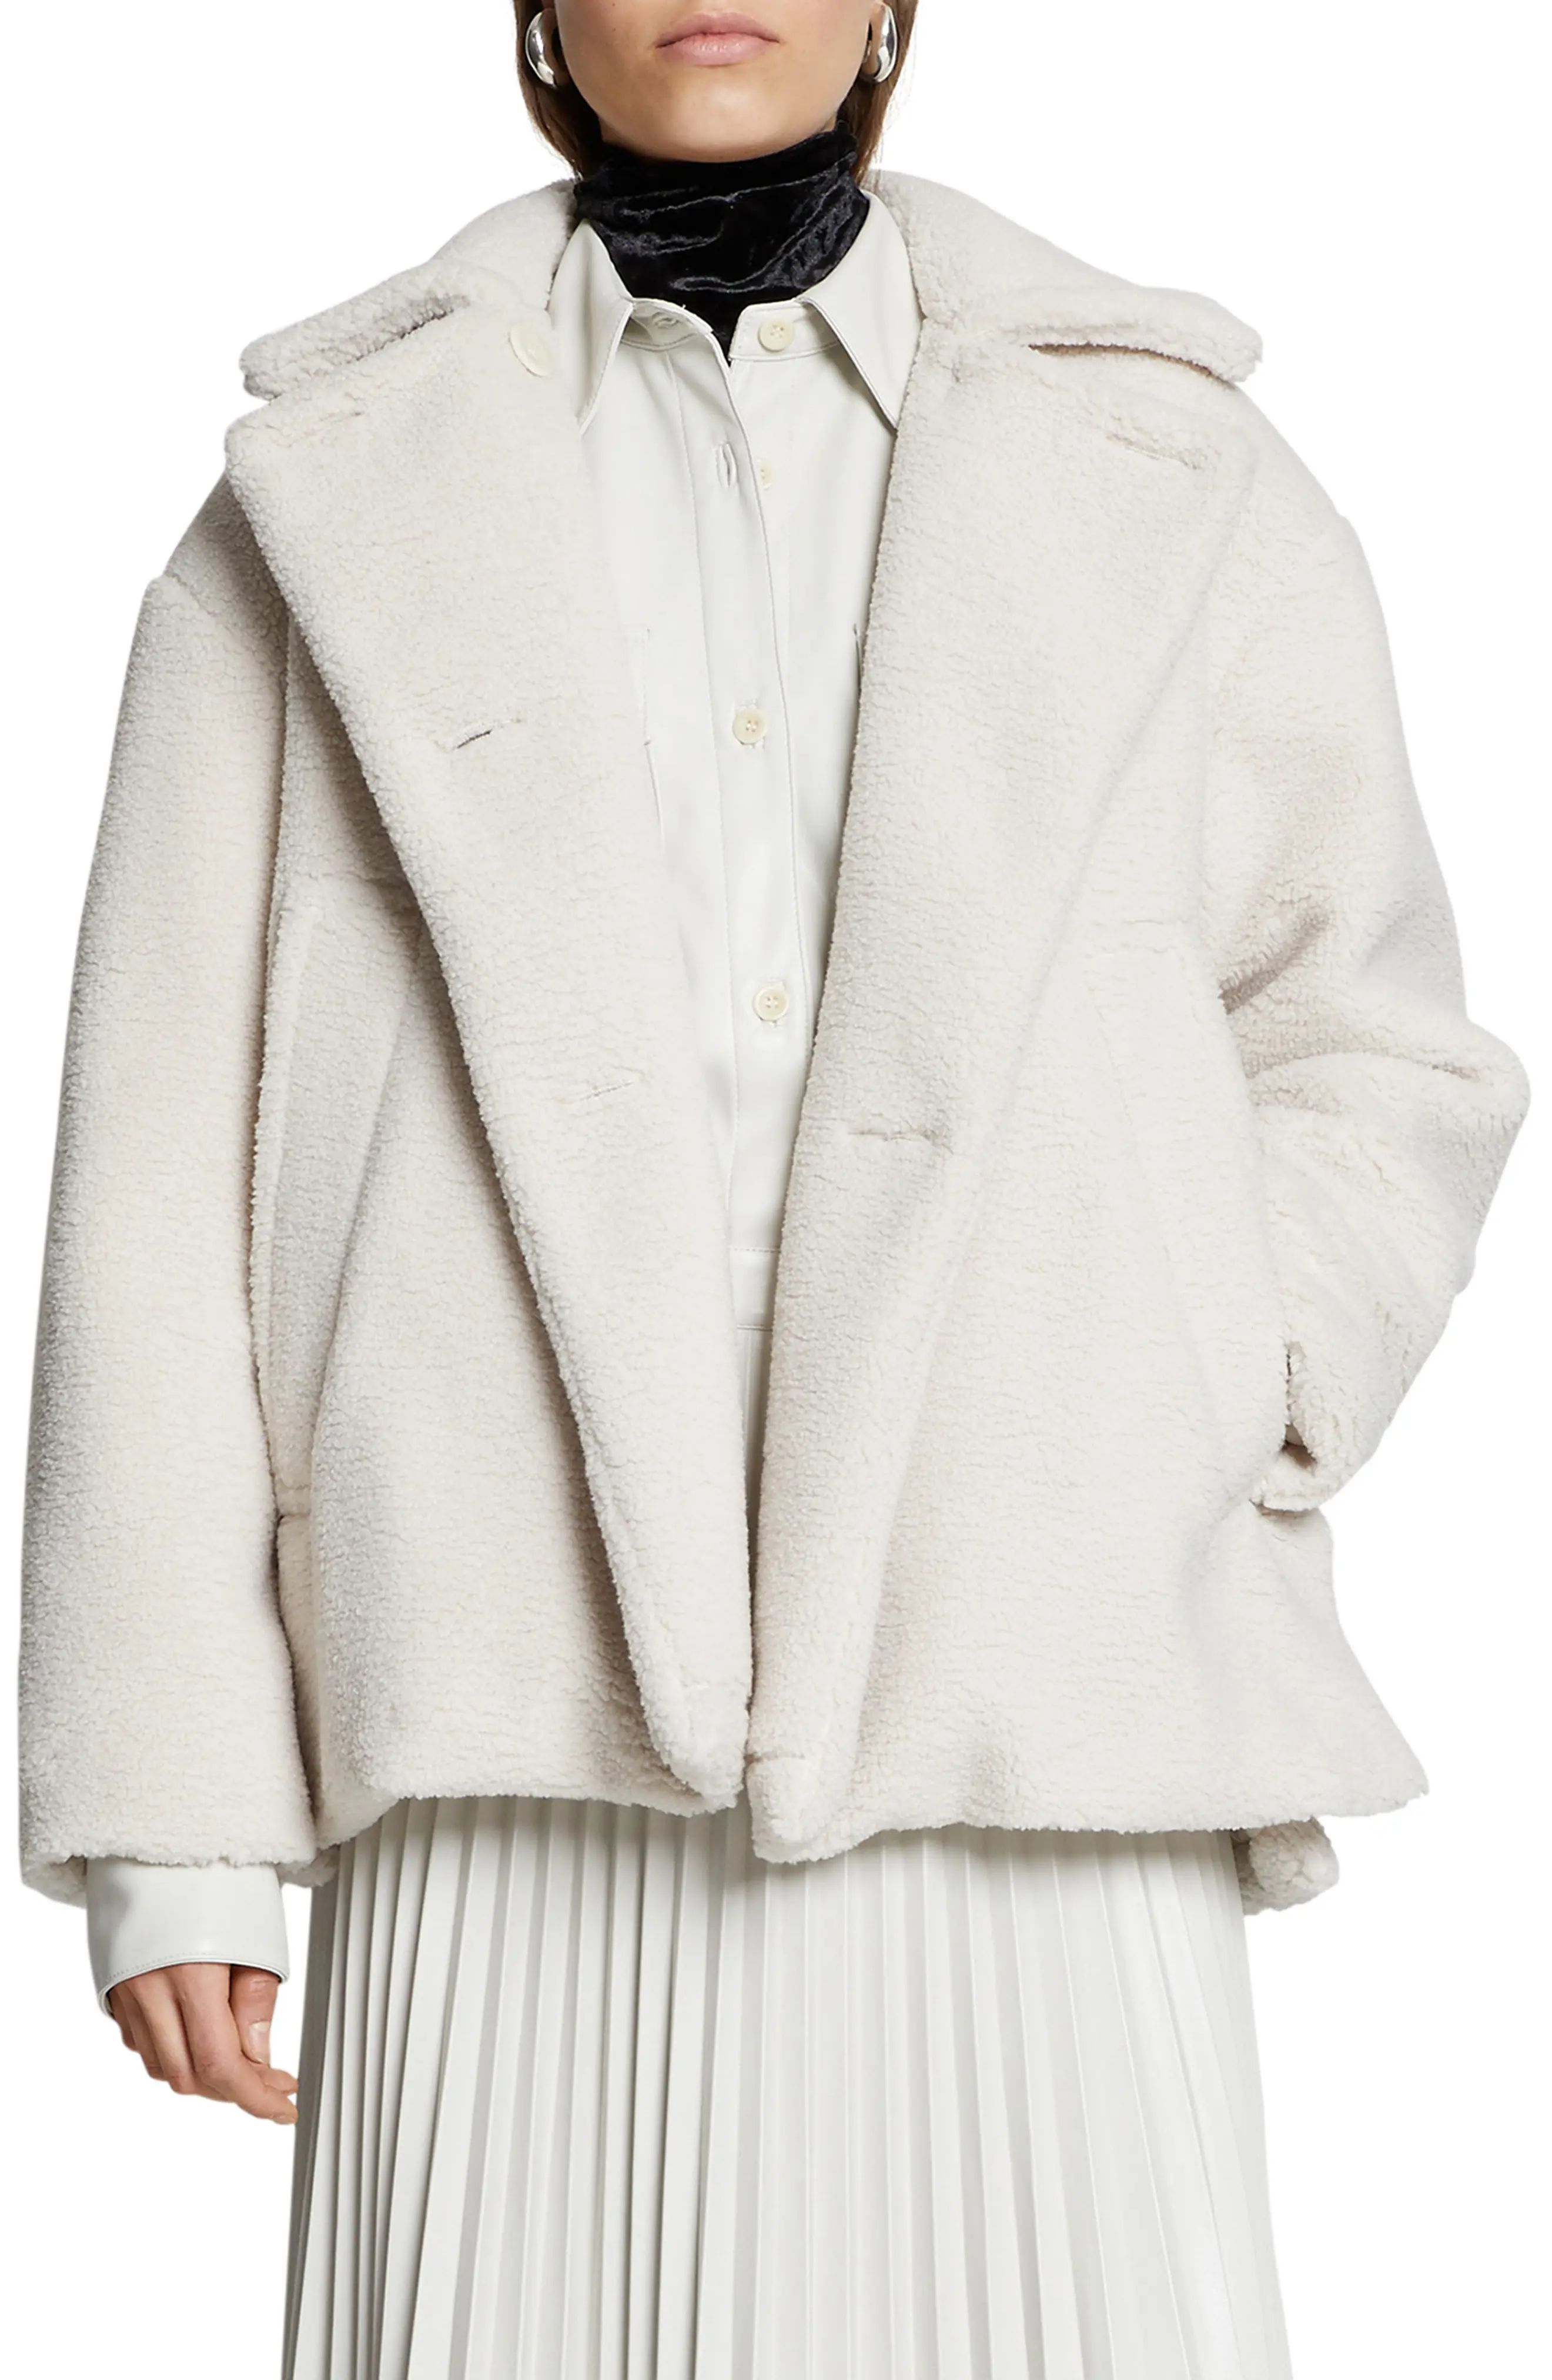 Proenza Schouler White Label Cotton Blend Teddy Jacket, Size X-Large in Vanilla at Nordstrom | Nordstrom